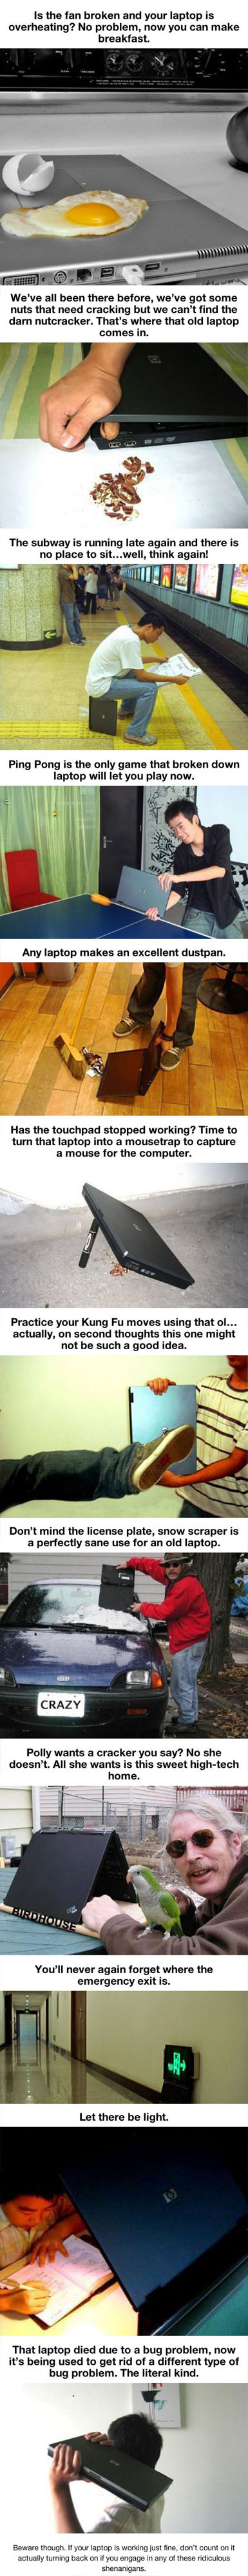 12 ridiculous yet absurdly useful ways to use your laptop after it dies - meme